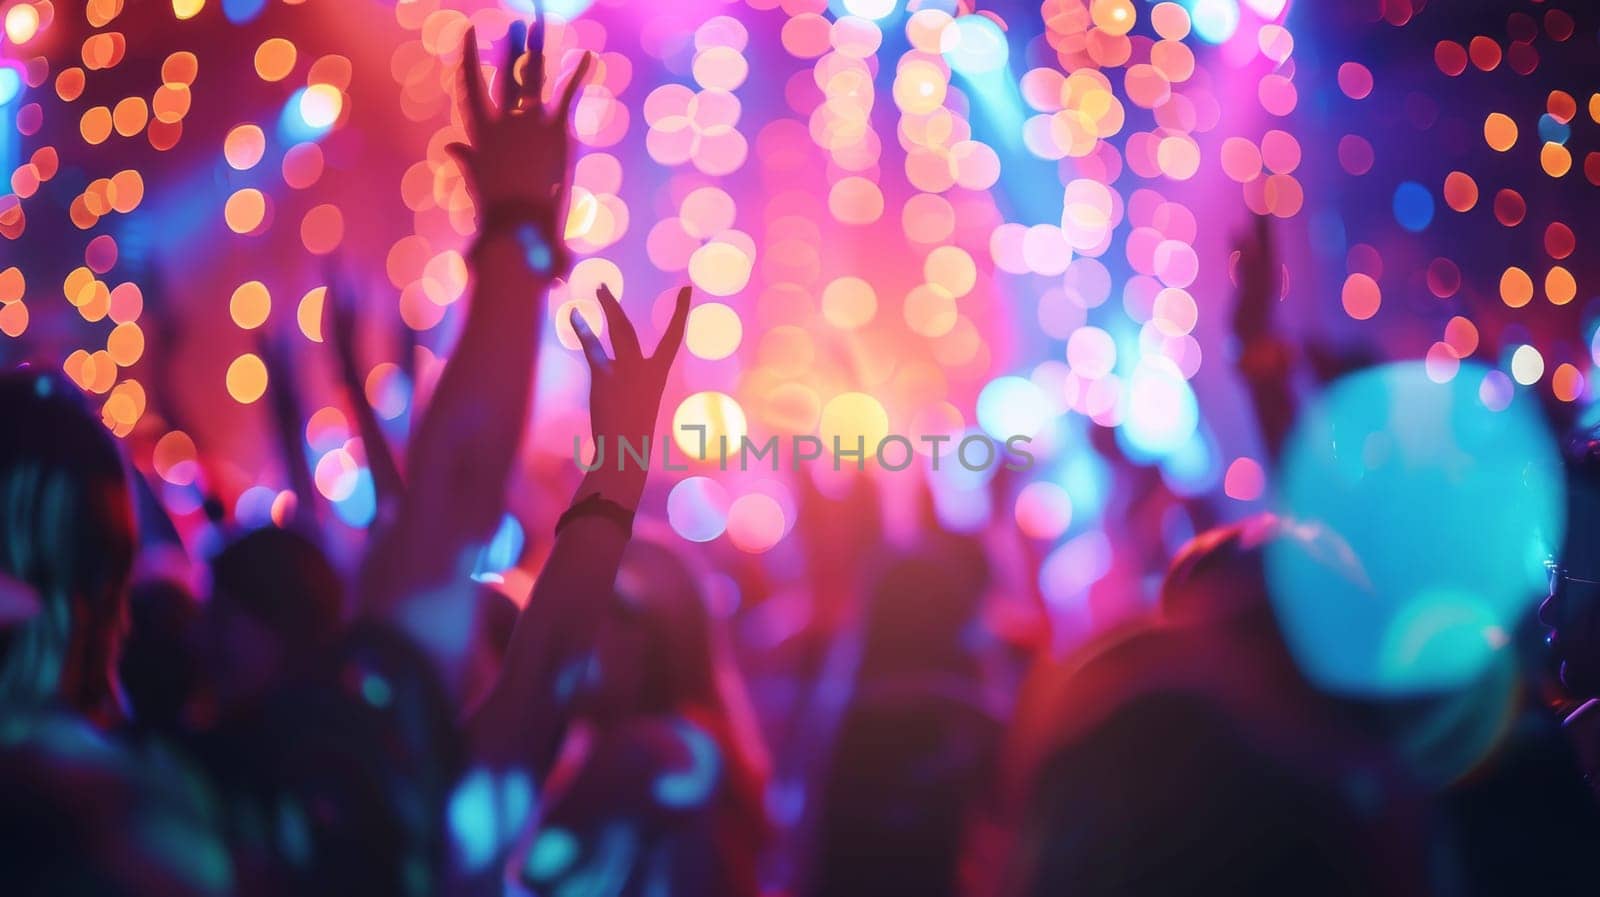 A couple is dancing in a crowded room with bright lights and blurry background. Scene is lively and romantic